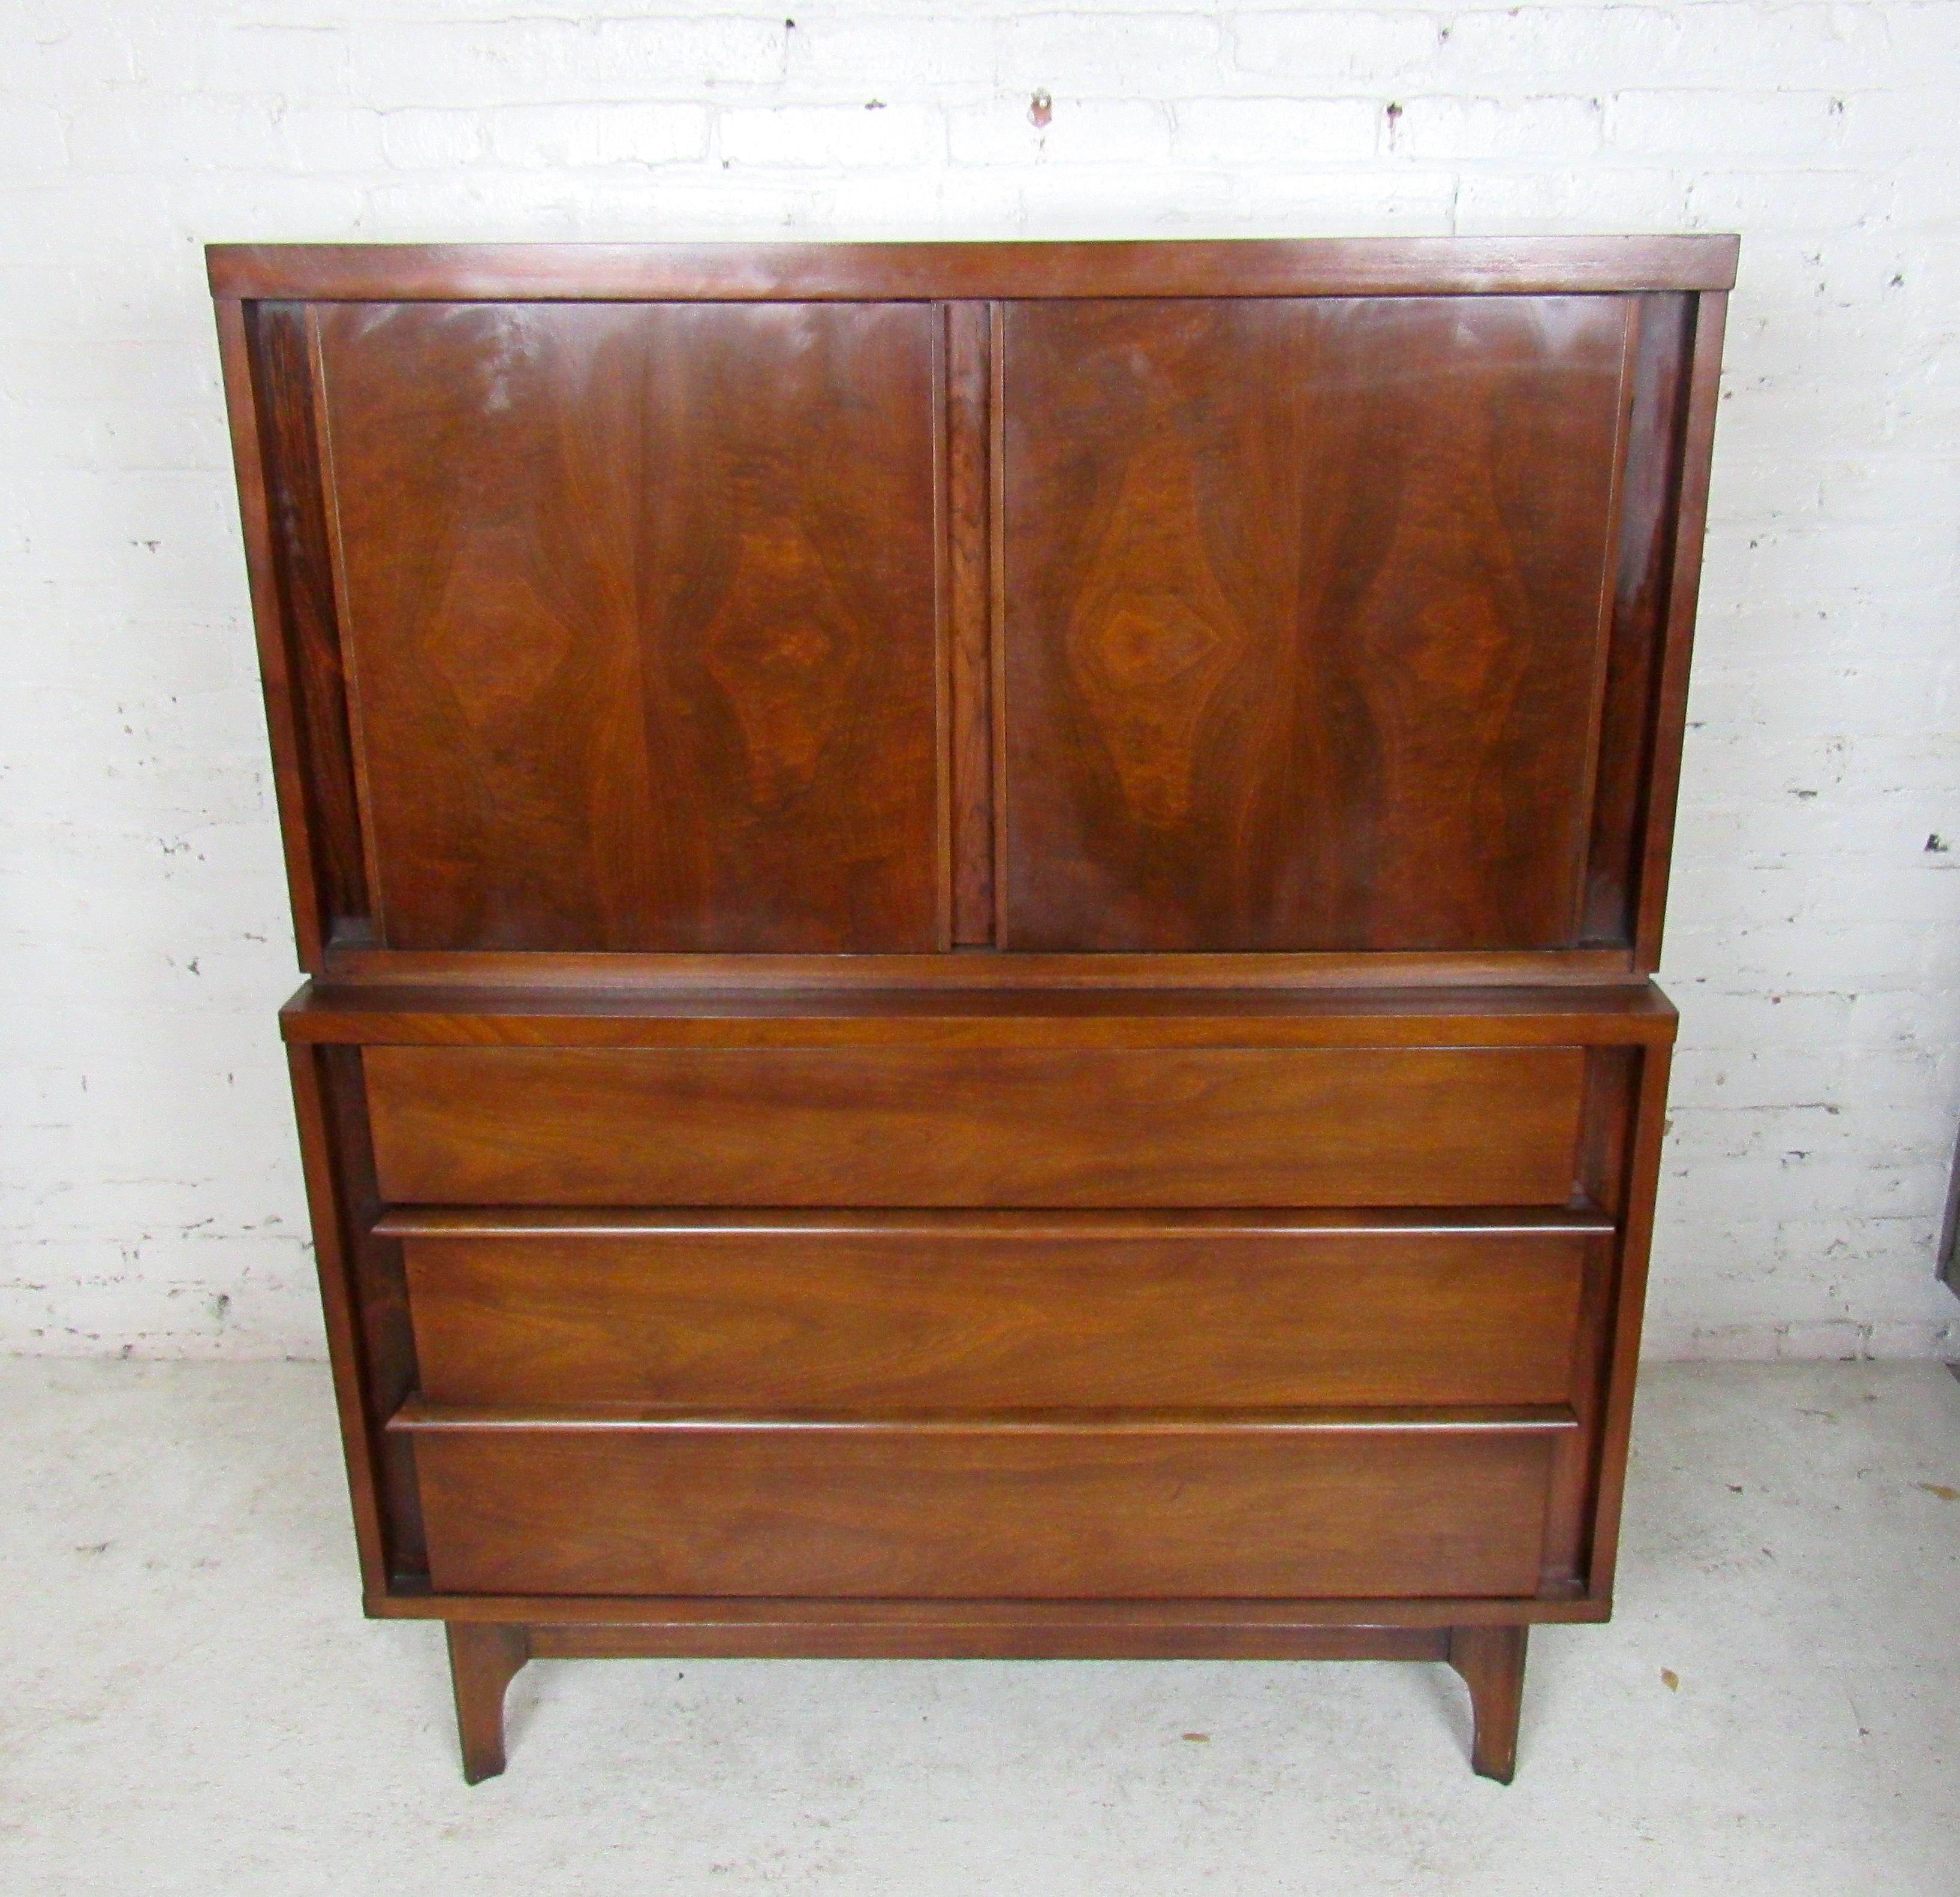 Vintage modern highboy dresser by Kent Coffey featuring three large drawers on the bottom, two more drawers behind the top doors.

Please confirm item location - NY or NJ - with dealer).